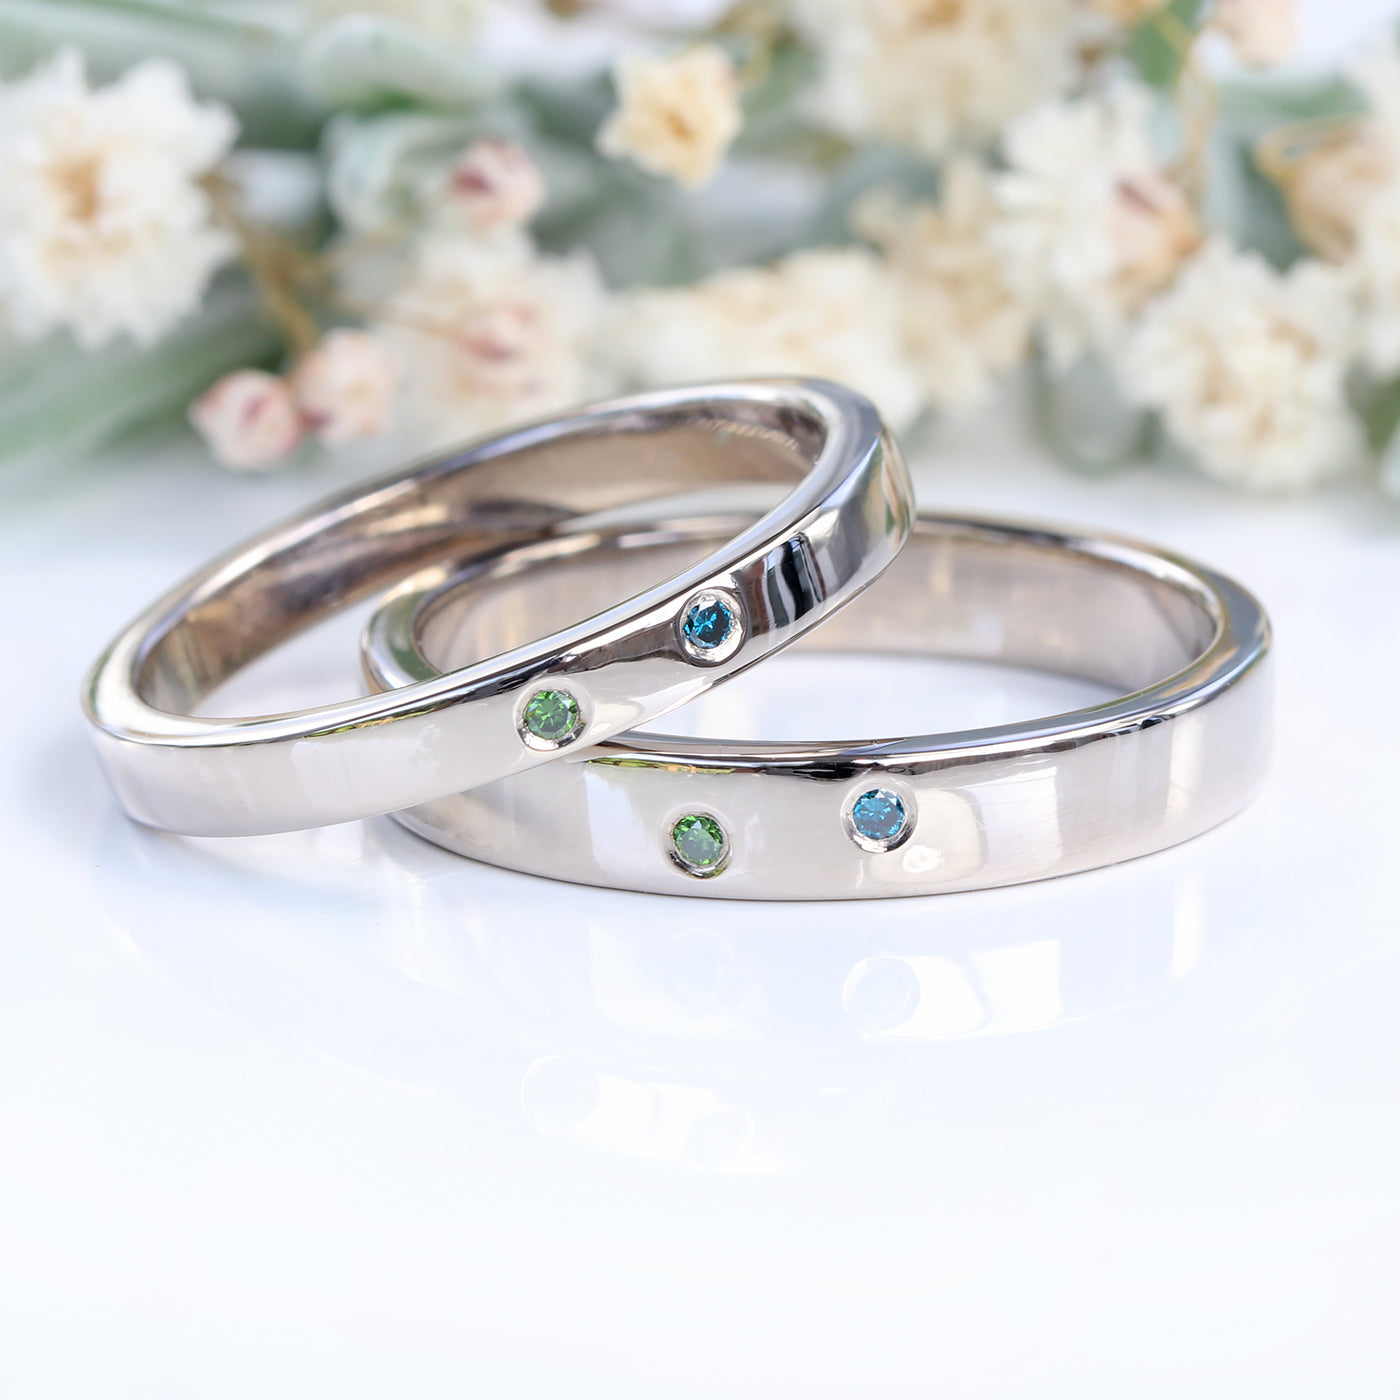 Bespoke 18ct White Gold Wedding Rings Set with Sapphires